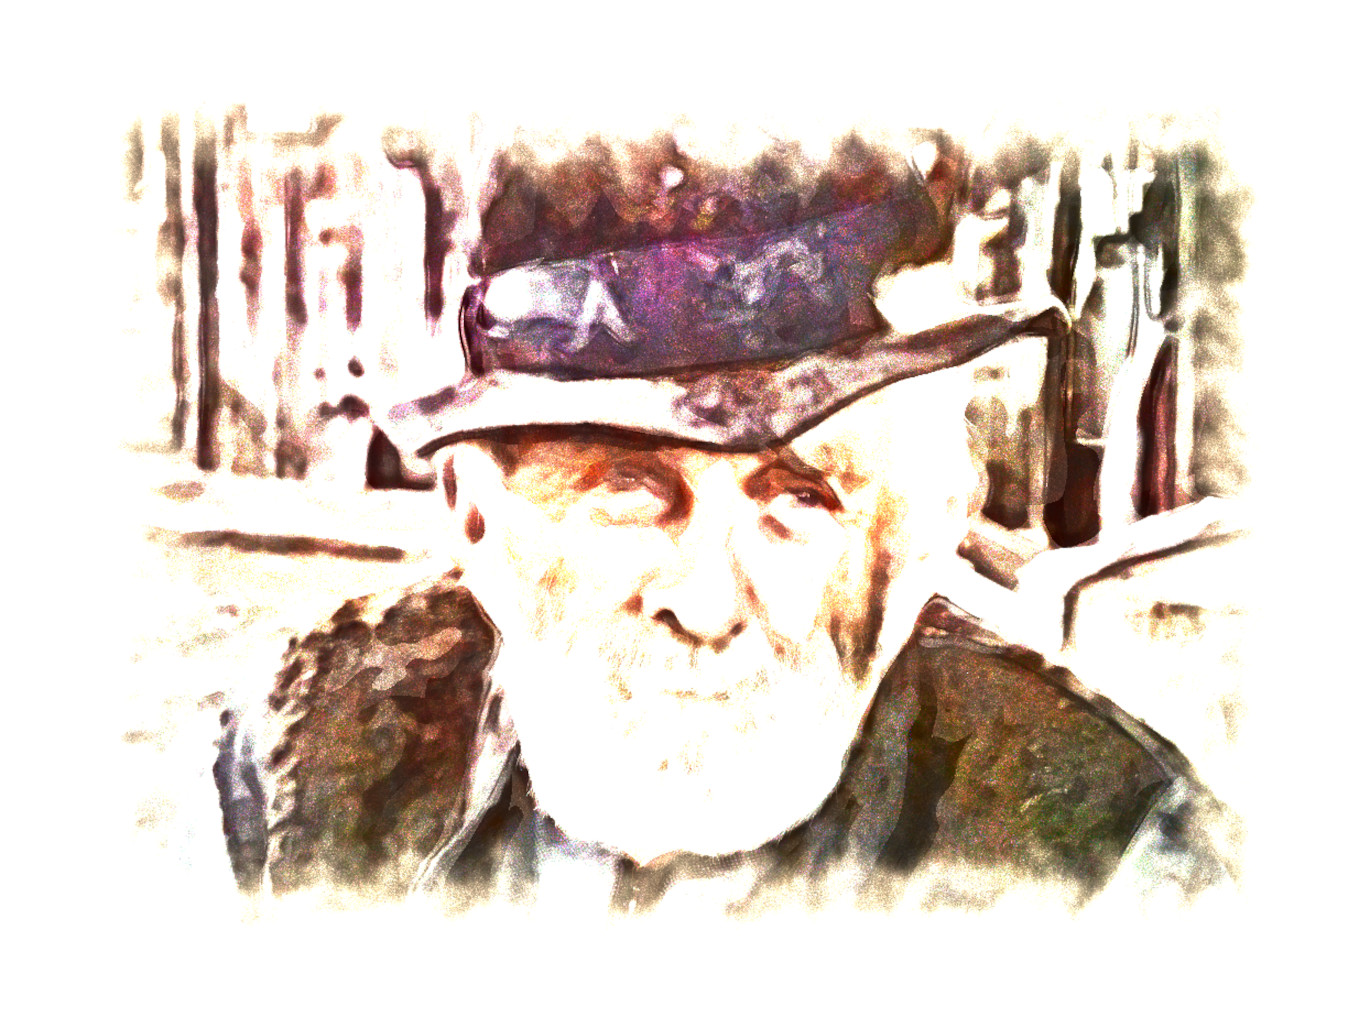 2023-10-01 16-49-47 peasant-482727 with a Watercolor Pastels Effect 2023 (4.0,75.0,30.0,40.0,10.0,9.0,80.0,False,1).jpg